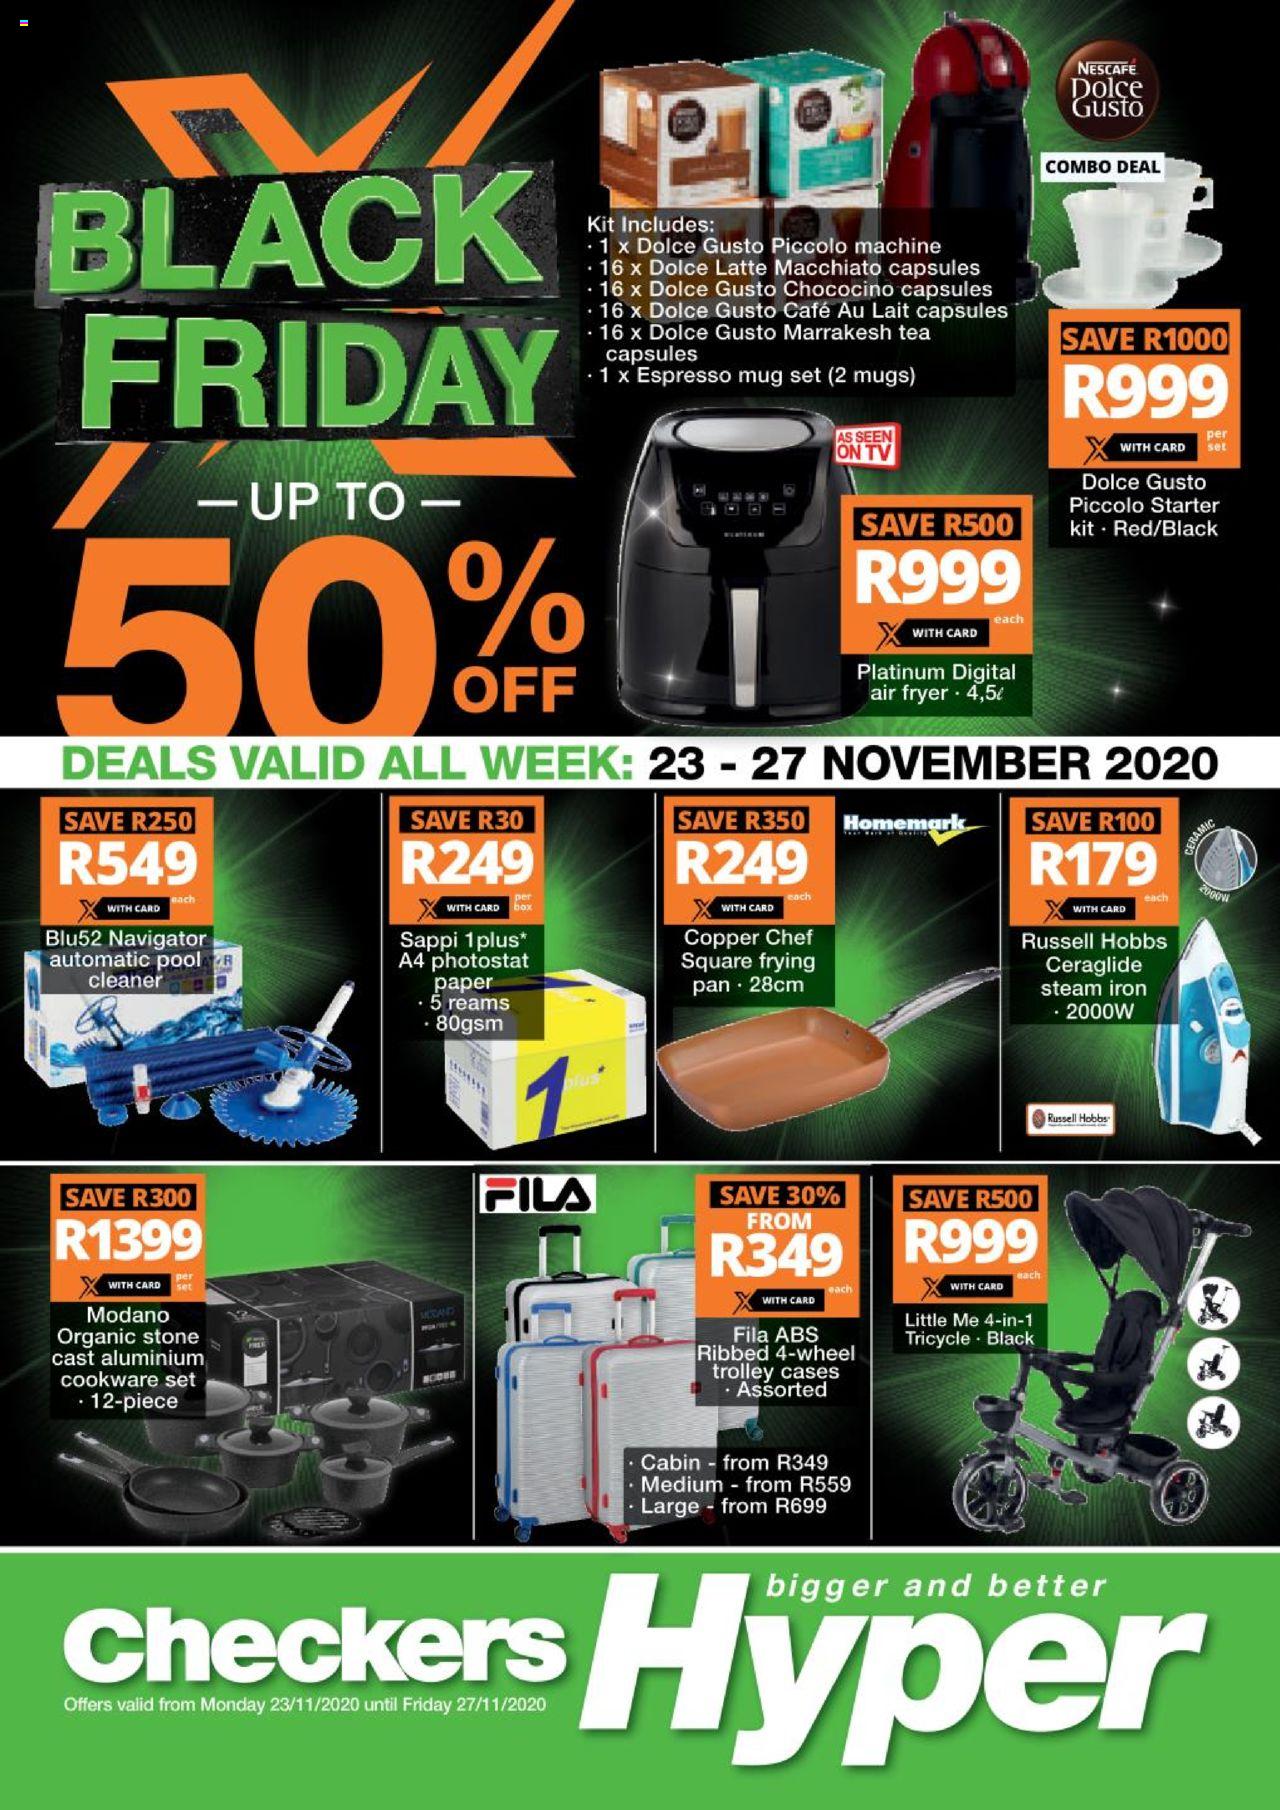 Checkers Black Friday Catalogue Specials 2021 - Where Can You Get Black Friday Deals